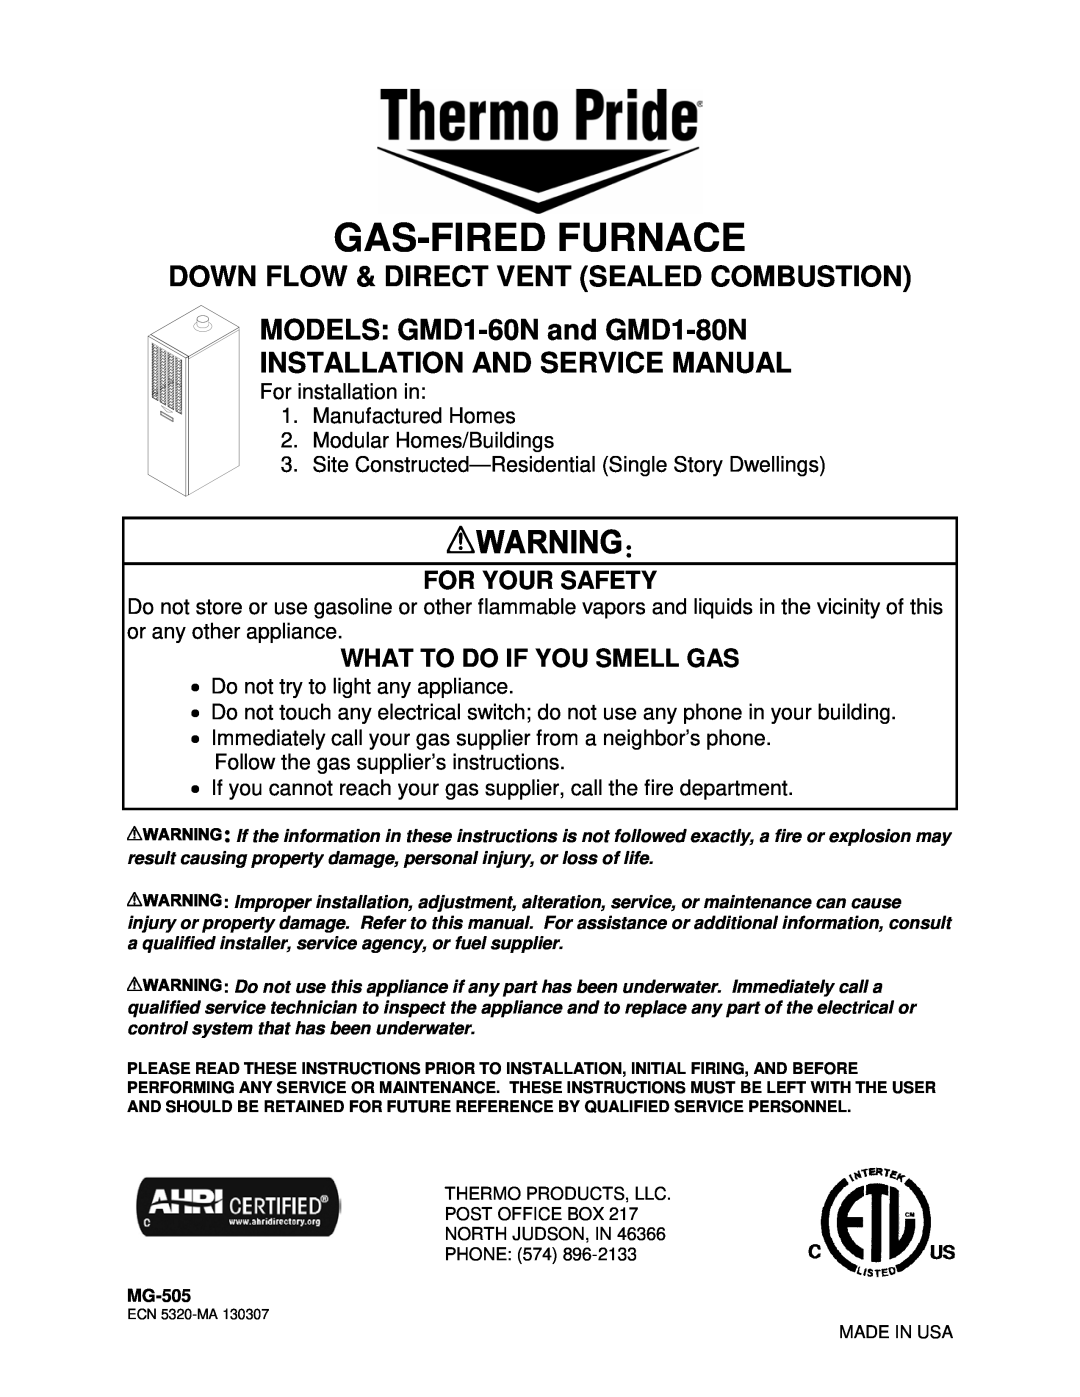 Thermo Products GMD1-60N service manual Gas-Firedfurnace, Down Flow & Direct Vent Sealed Combustion, For Your Safety 